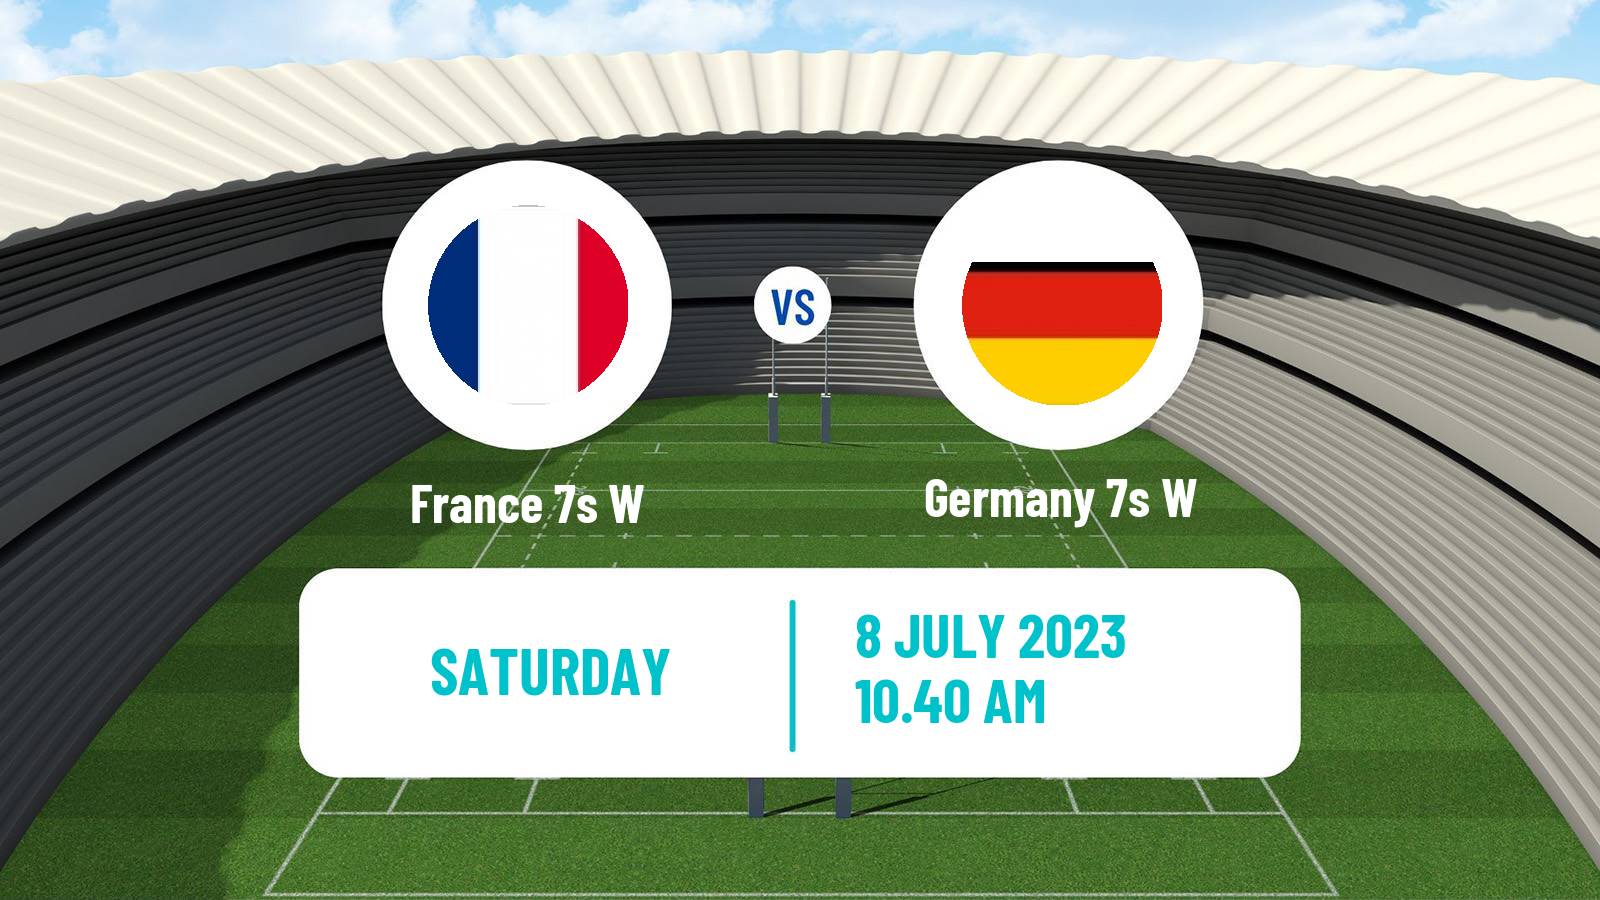 Rugby union Sevens Europe Series Women - Germany France 7s W - Germany 7s W